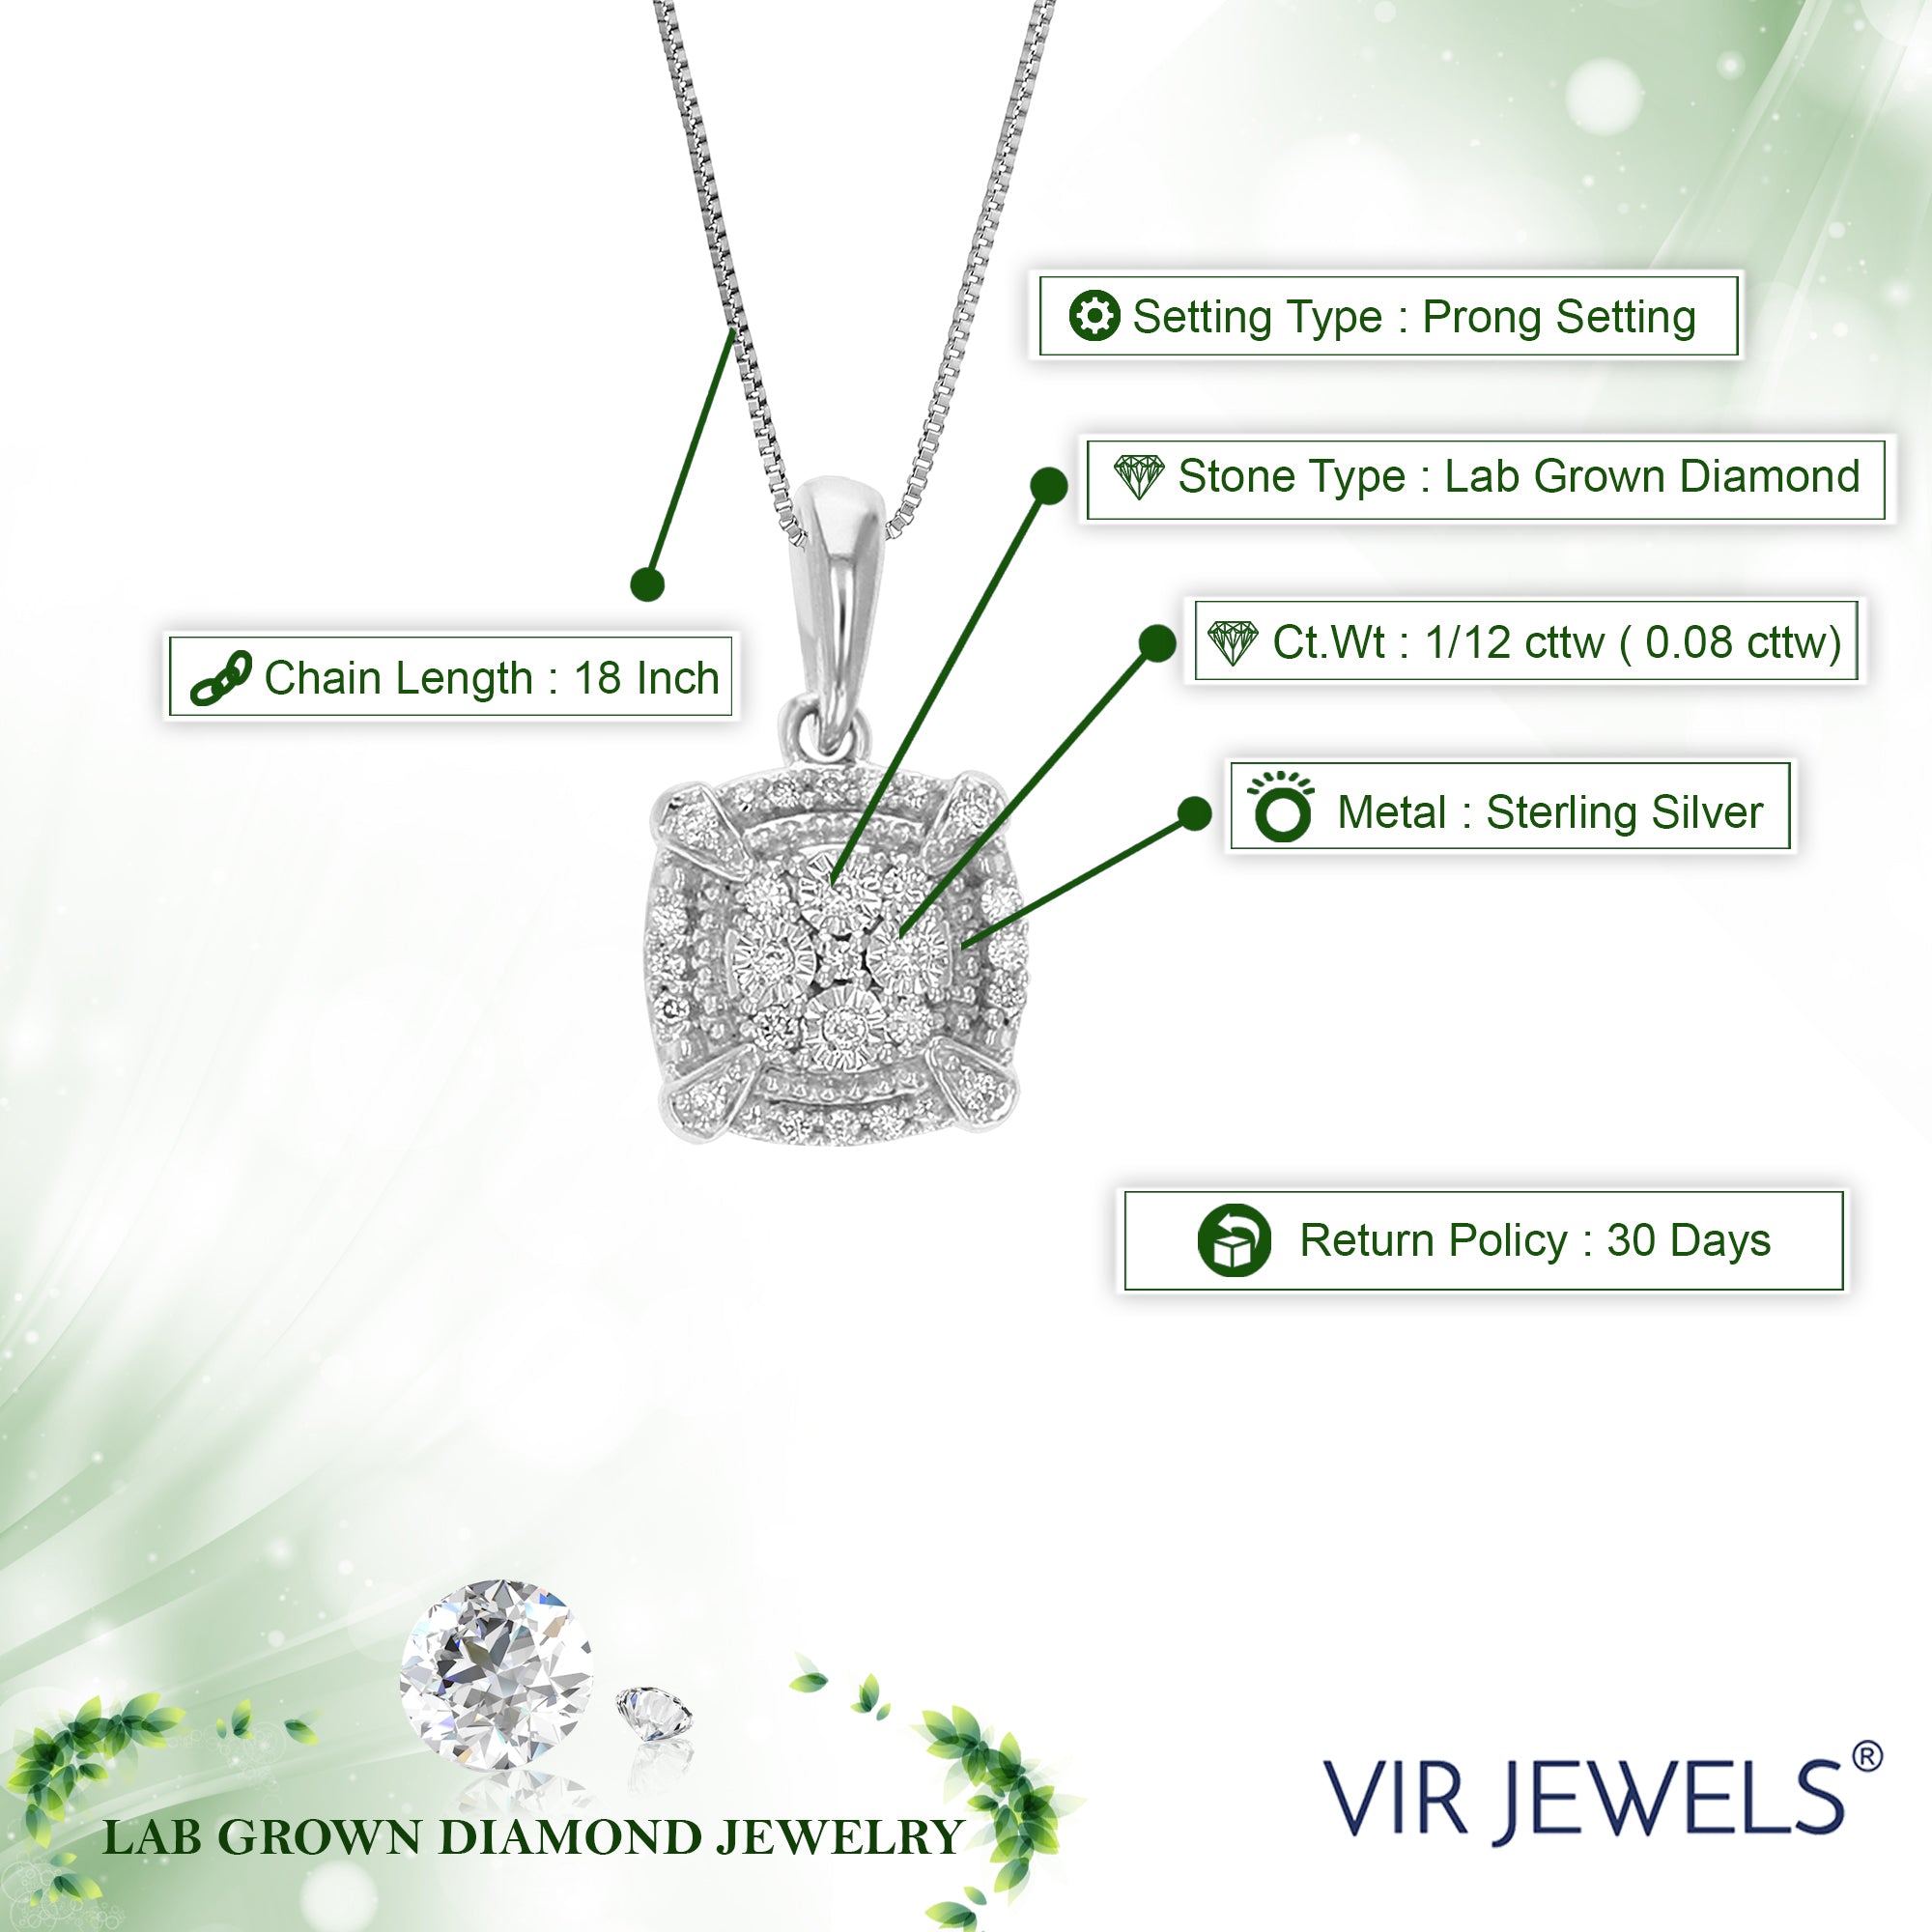 1/12 cttw Diamond Pendant Necklace for Women, Lab Grown Diamond Square Cluster Pendant Necklace in .925 Sterling Silver with Chain, Size 2/3 Inch